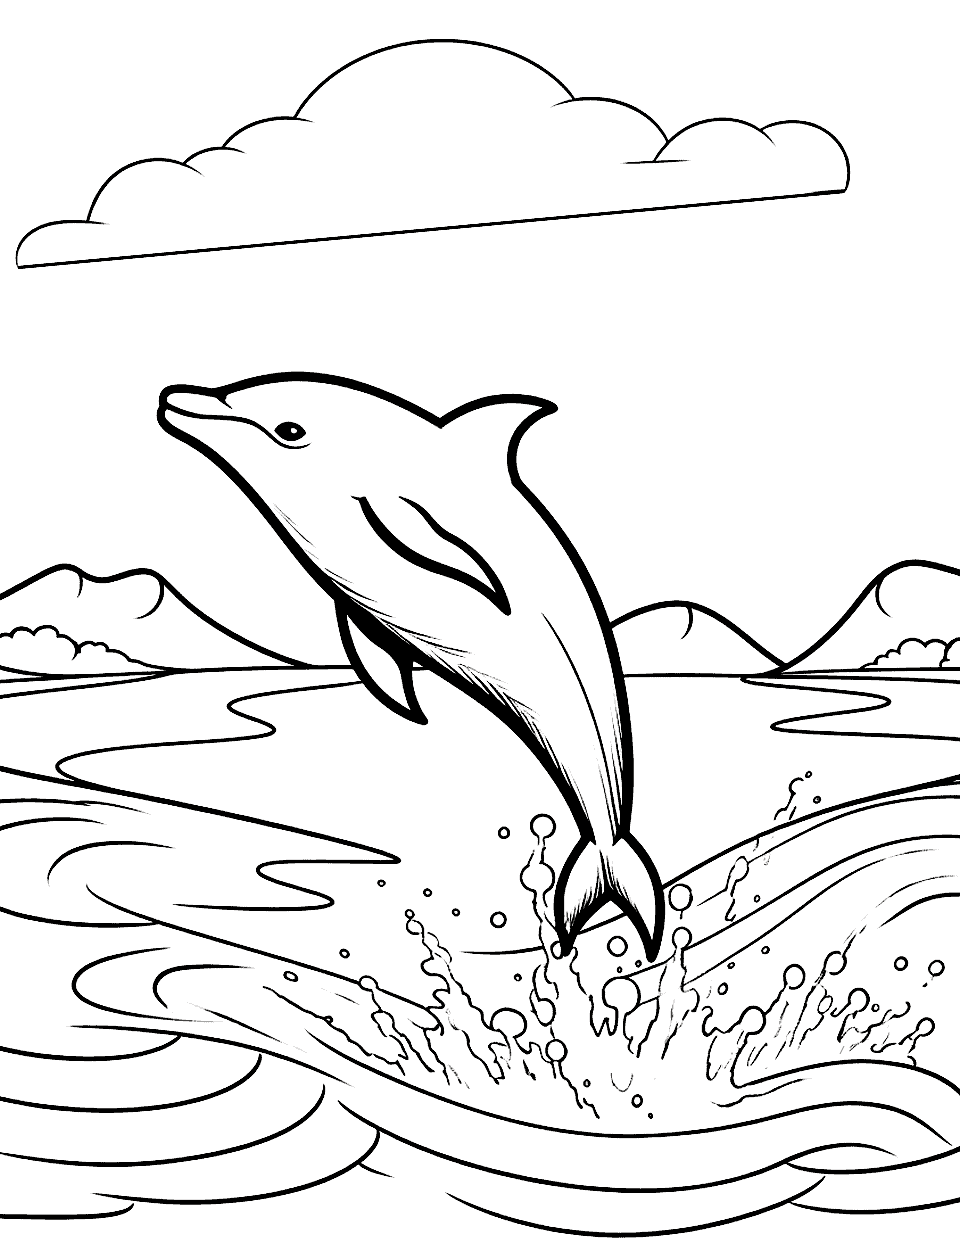 Dolphin Leaping Out of the Water Coloring Page - A dolphin jumping out of the sea, with the horizon in the background.